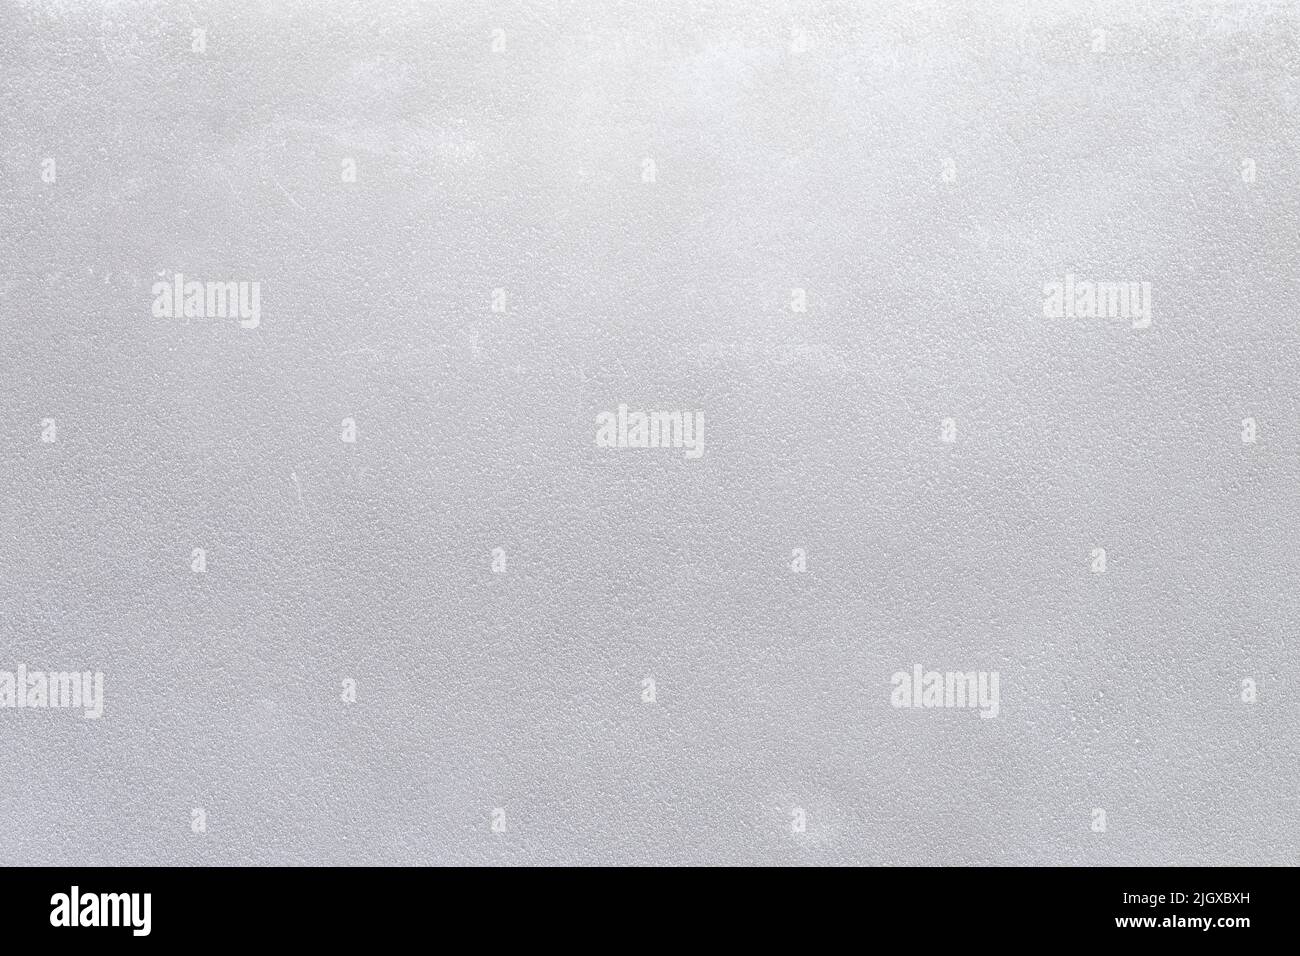 Plastered concrete or stone wall painted in white, front view. High resolution full frame textured background. Copy space. Stock Photo